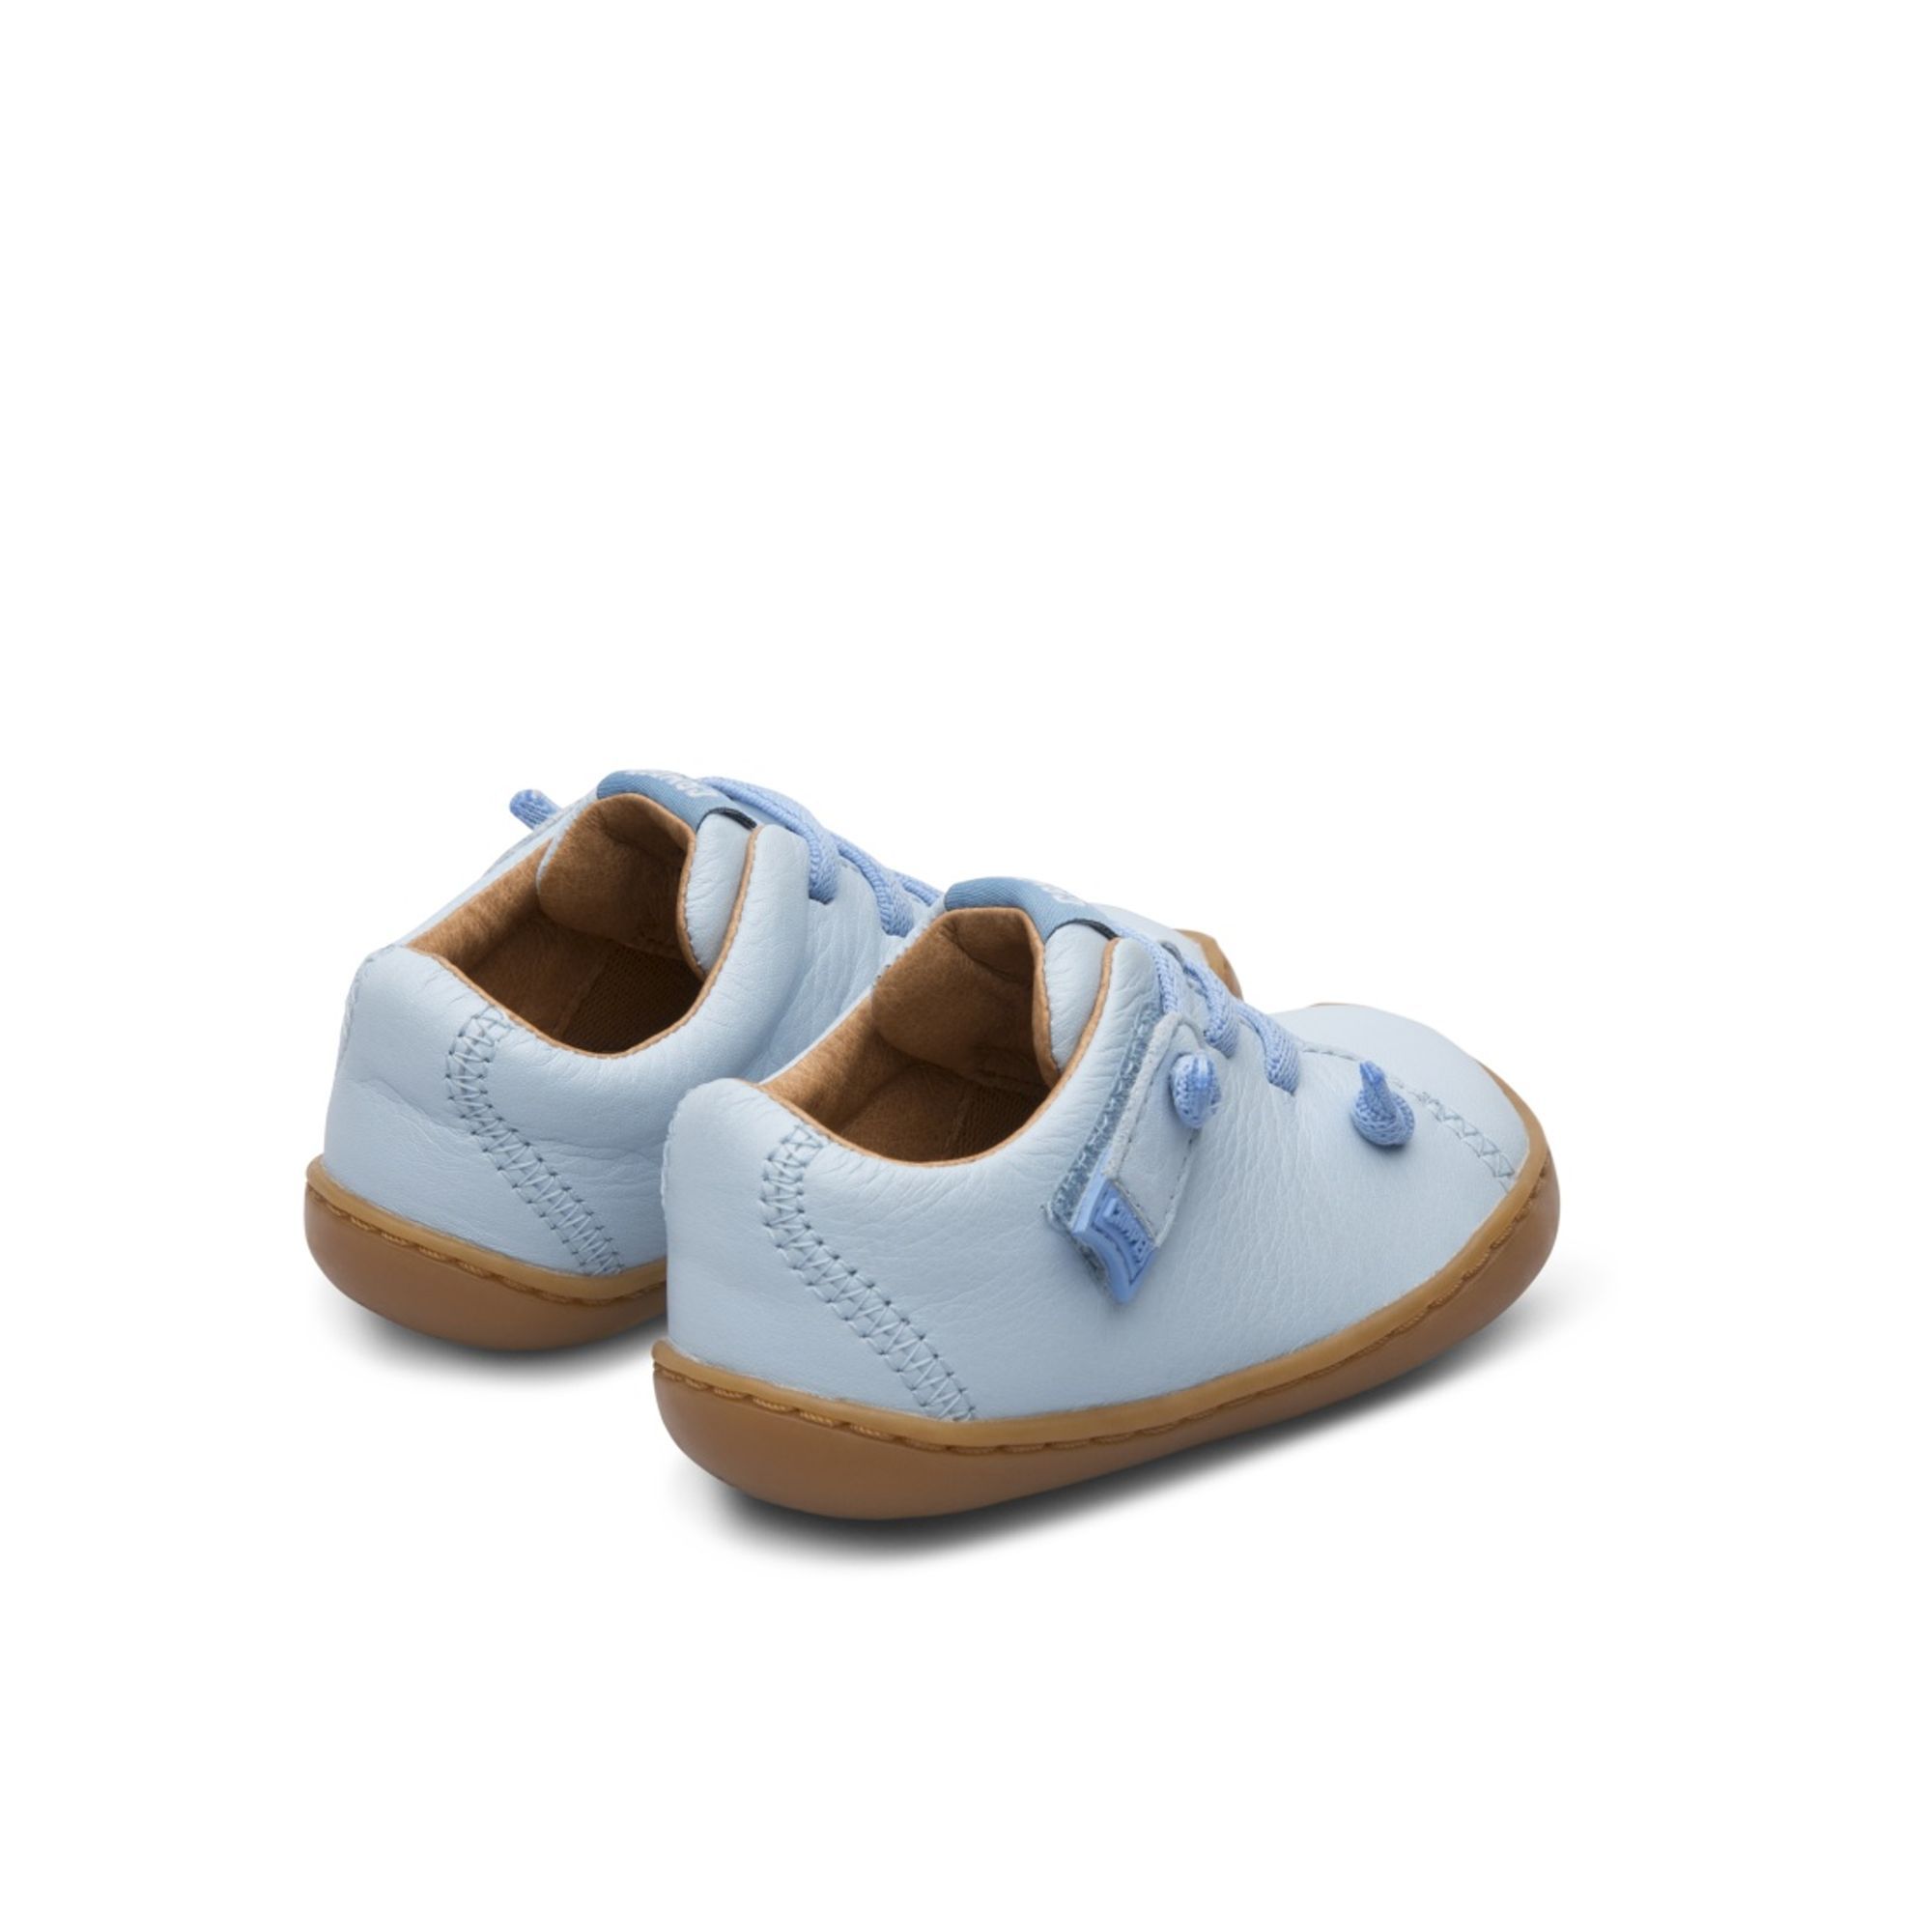 Blue shoe for kids. 100% leather upper with elastic laces and velcro. 100% brown rubber outsole.

A Little Better, Never Perfect 

The First Walkers range features flexible-yet-sturdy styles made for little ones who are taking their first steps. Discover our collection of comfortable shoes for toddlers that are designed to support those ready to embark out on their own.

Our Peu kids' shoes are shaped with the natural curve of small feet in mind. Featuring elastic zigzag laces and a 360-degree stitched outsole, these unisex shoes are made for little adventurers with ambition to explore.